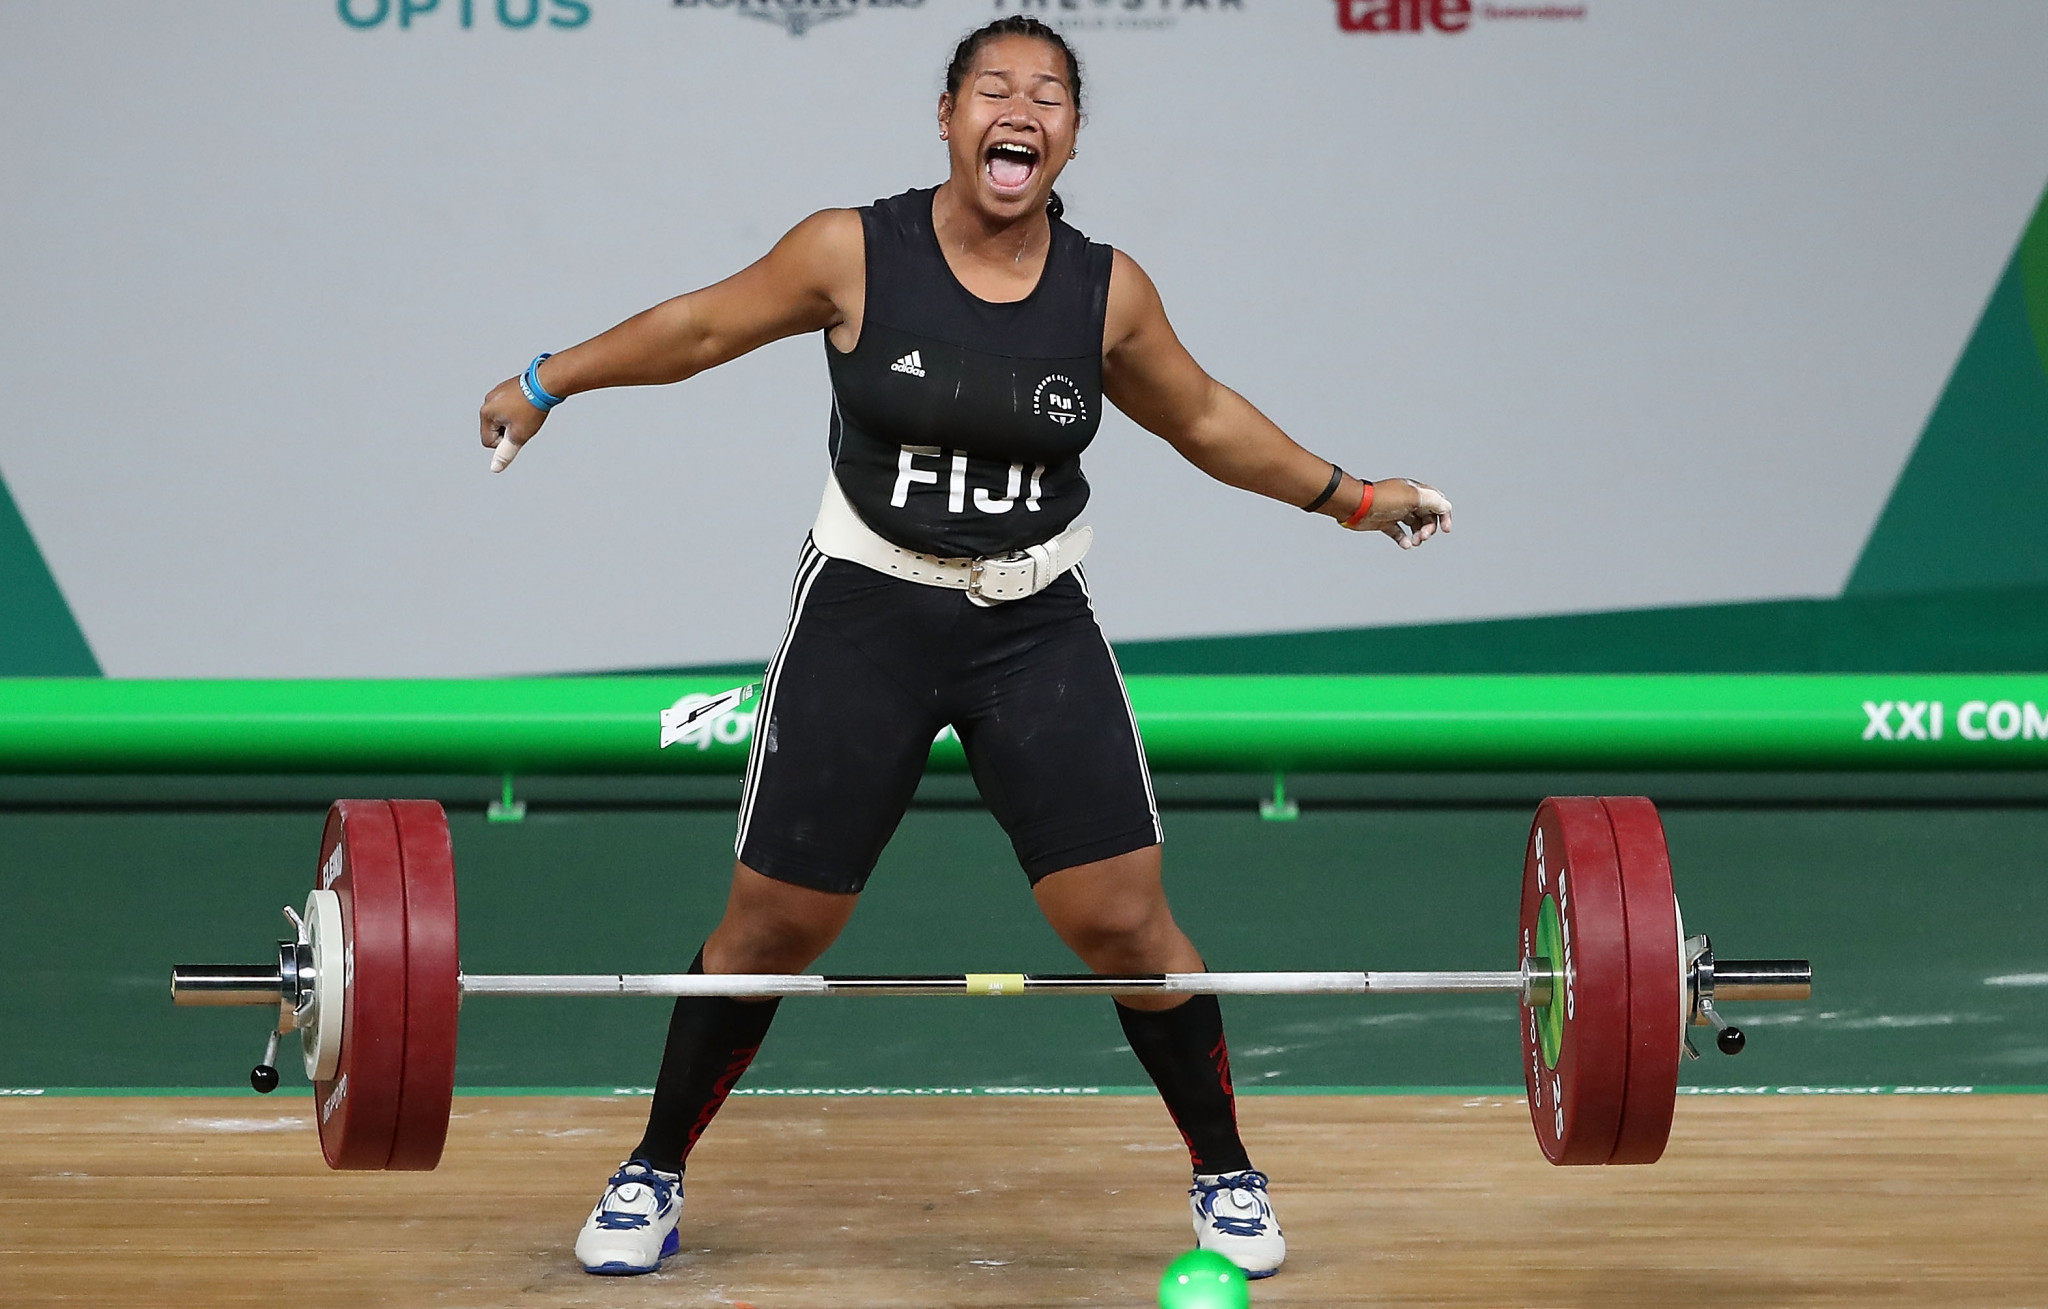 Eileen Cikamatana was Fiji's top prospect but left the country's set-up following a dispute ©Getty Images